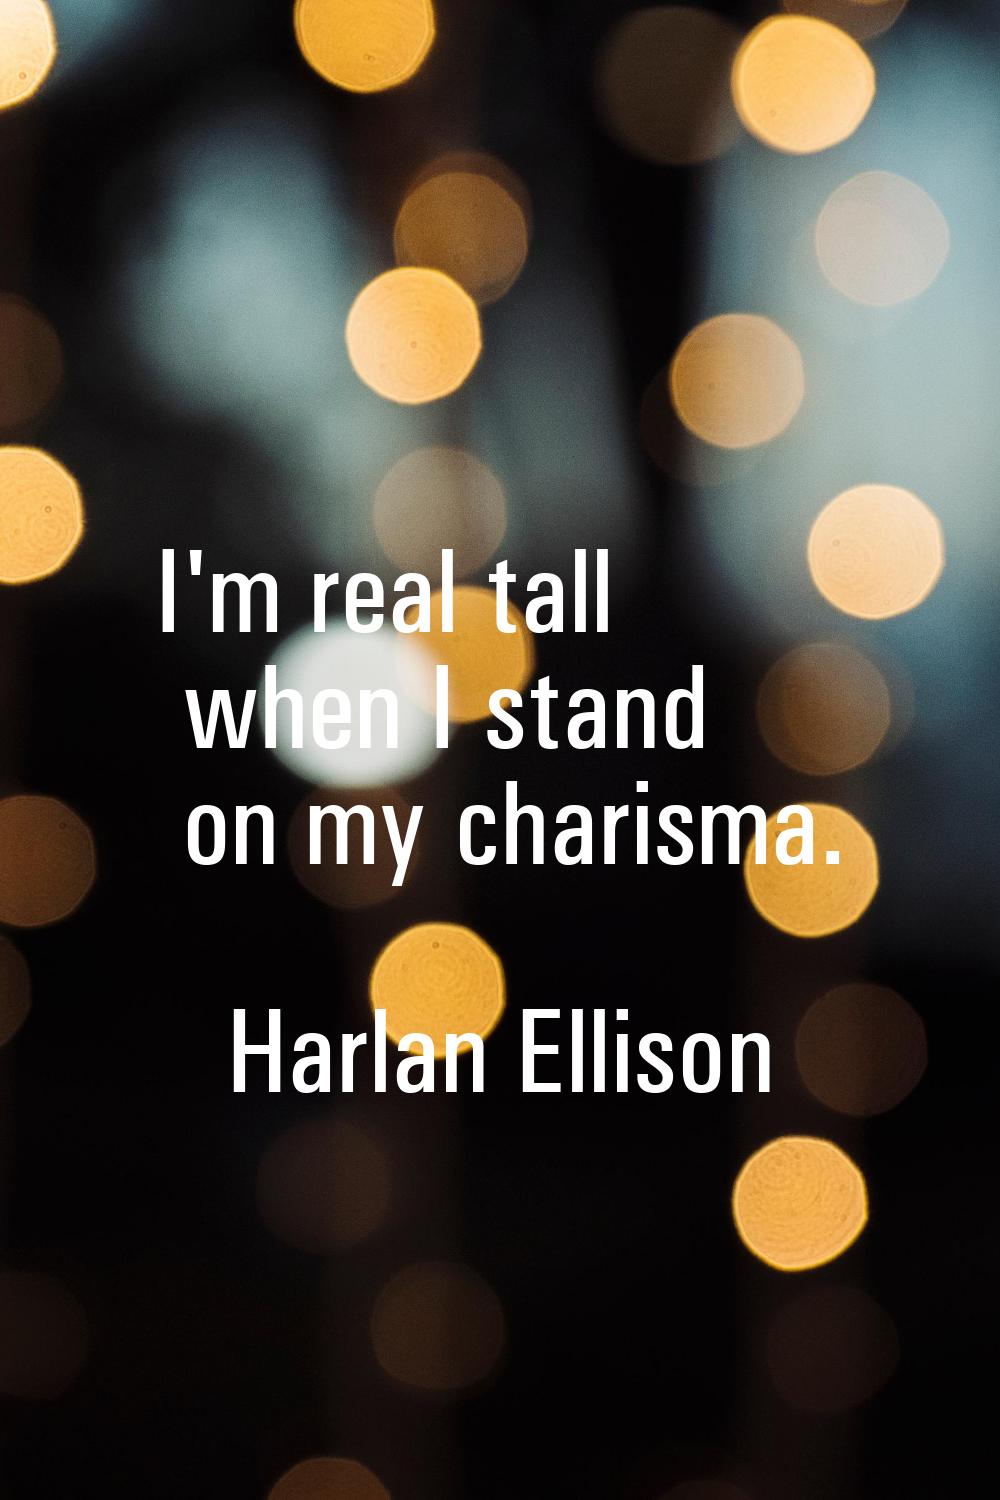 I'm real tall when I stand on my charisma.